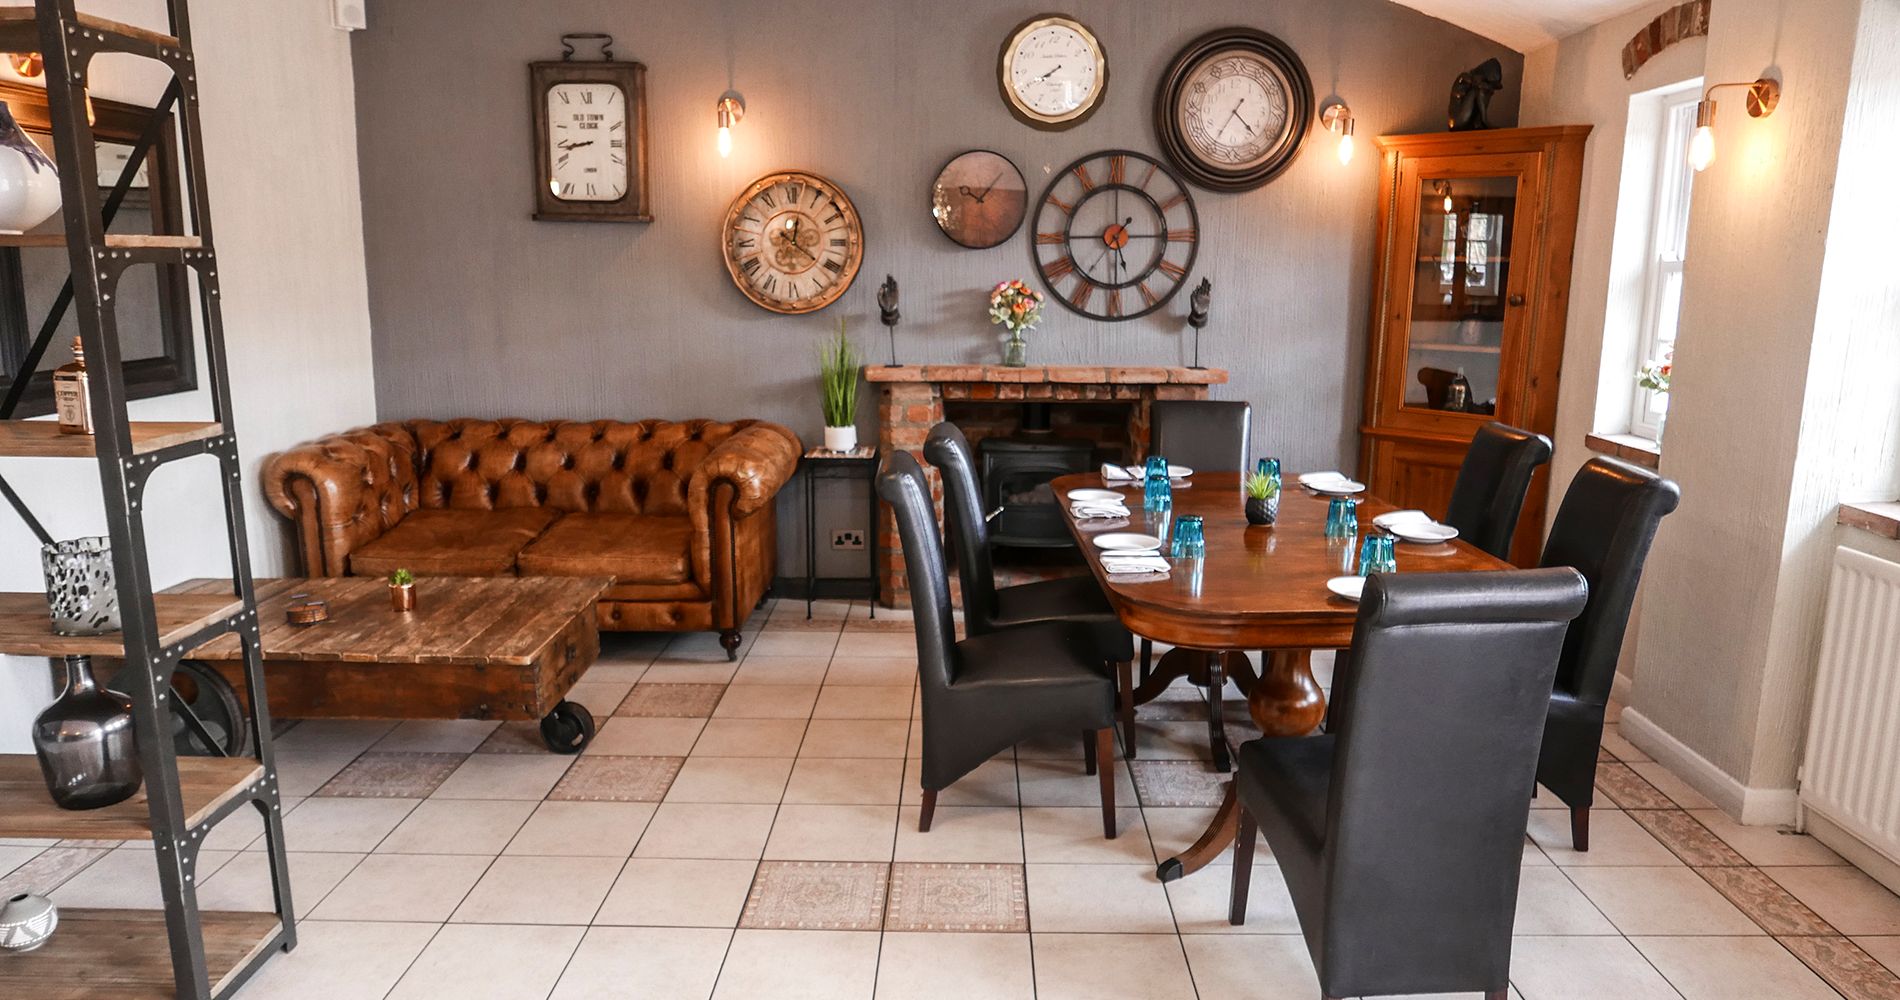 Settee and restaurant table with clocks on the rear wall